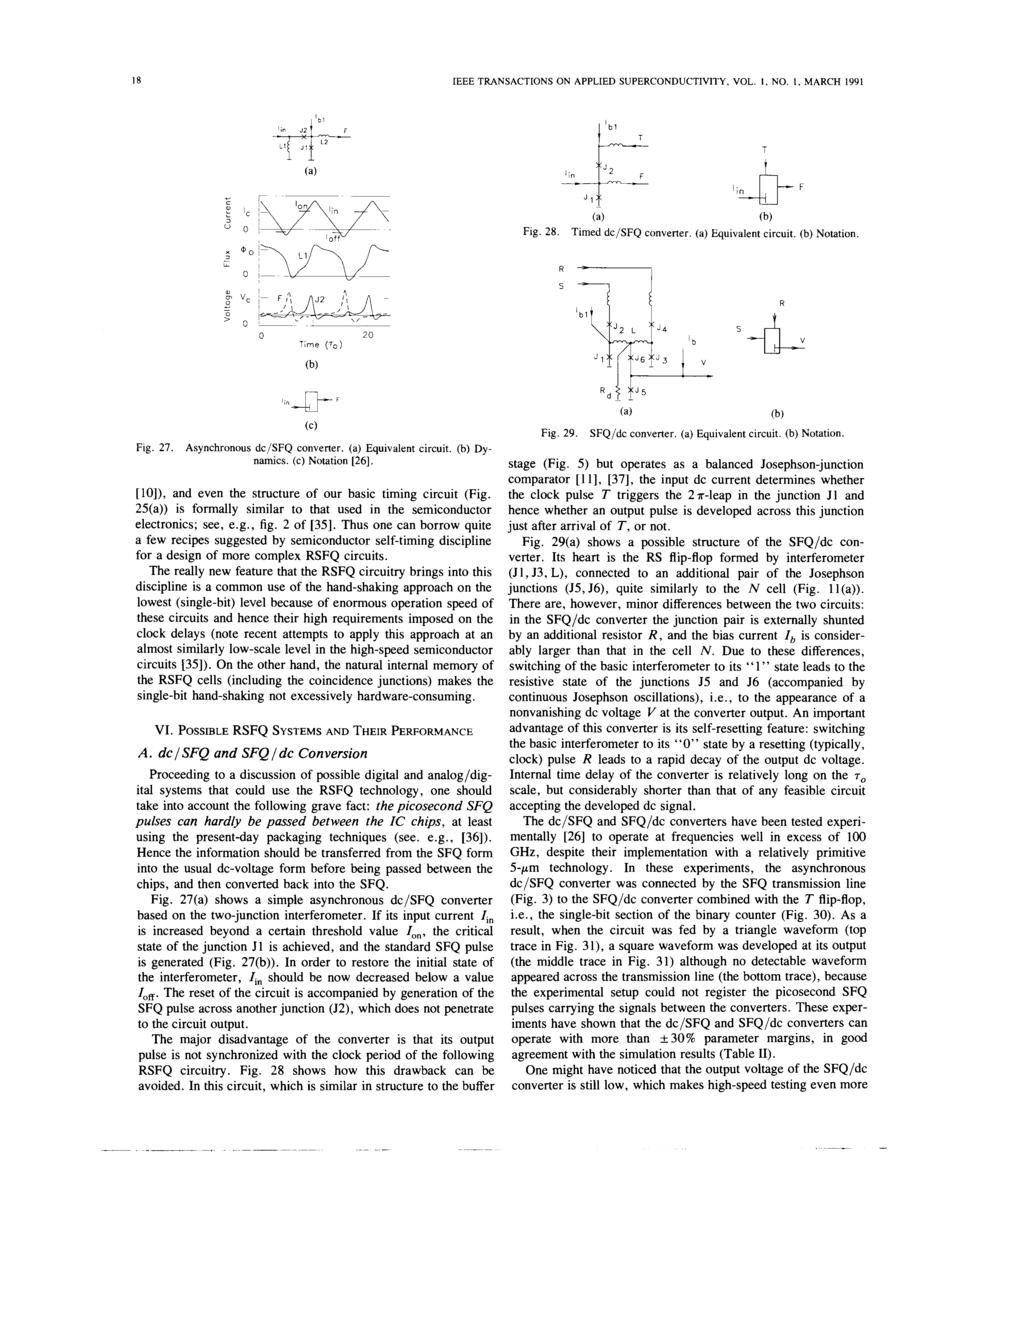 1 - ~/\ I 18 IEEE TRANSACTIONS ON APPLIED SUPERCONDUCTIVITY, VOL. I, NO. I, MARCH 1991 1 0 1~~0 off C: ~o! 1~ L1~ ;- 01- -~--- g' Ve g!! I\ ~ j\j2 )\ /\ - 20 Fig. 28. J1 Timed dc/sfq converter.